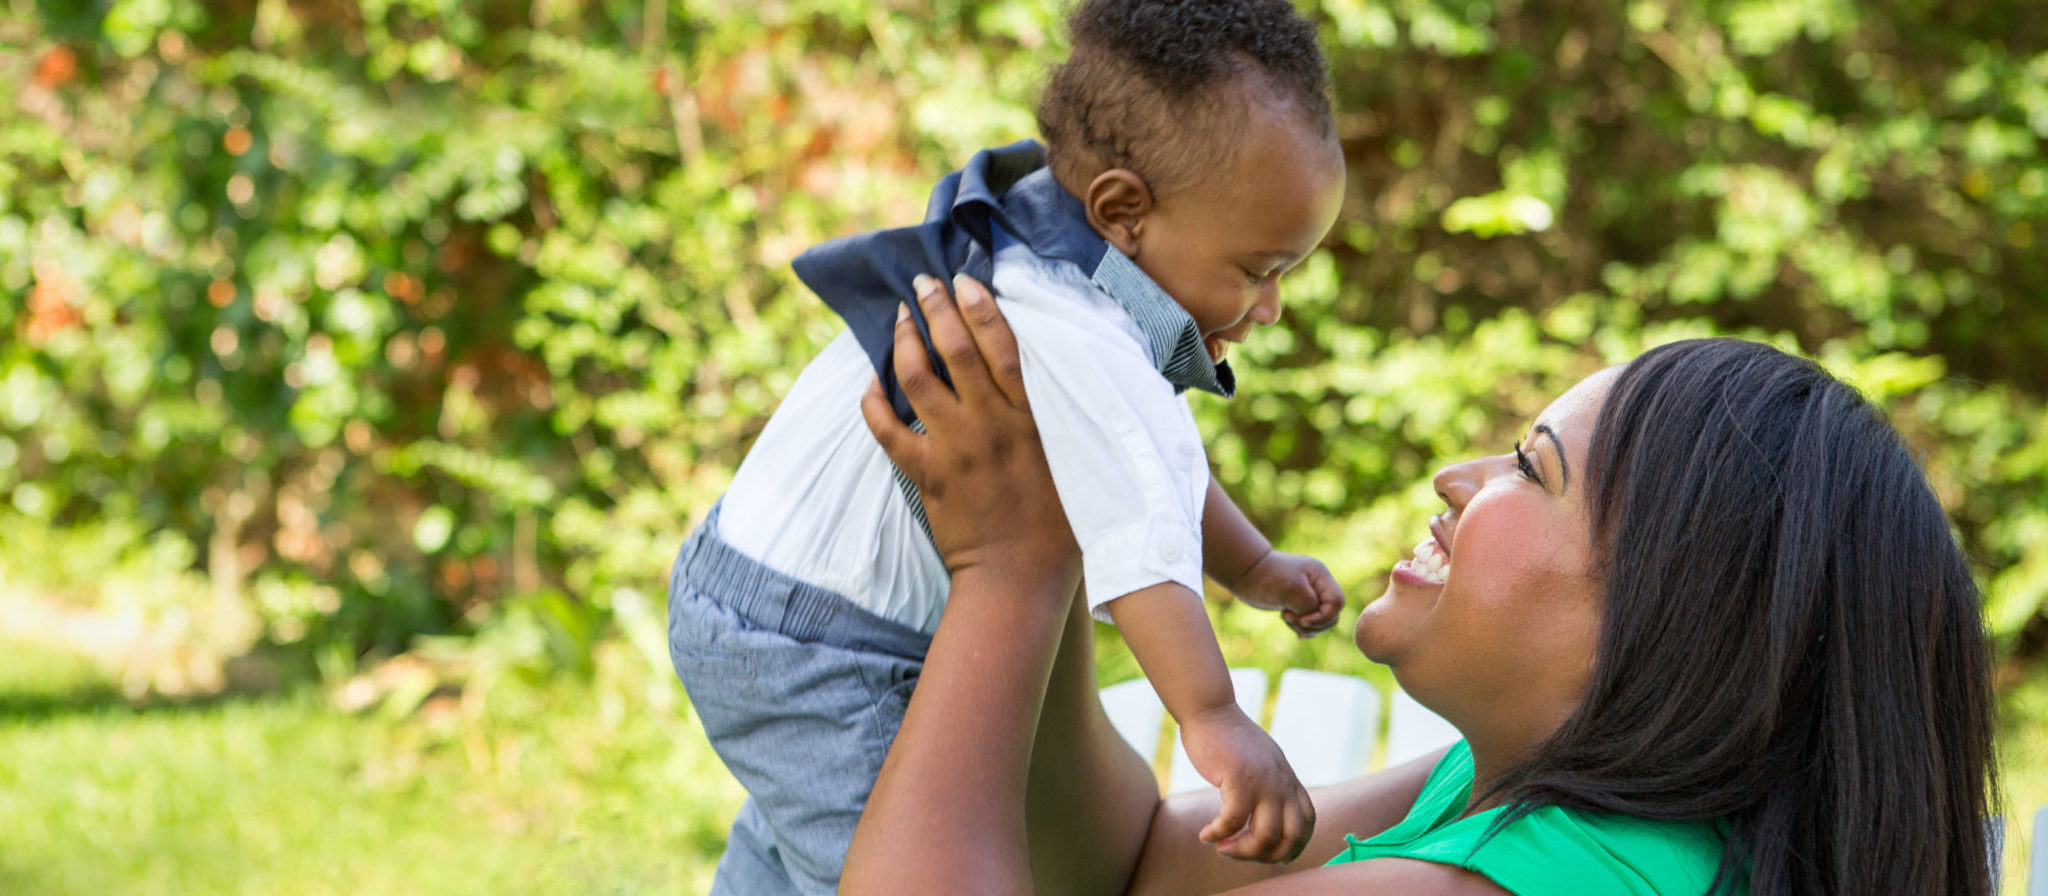 Taking your baby outside delivers great benefits for both yourself and your baby!